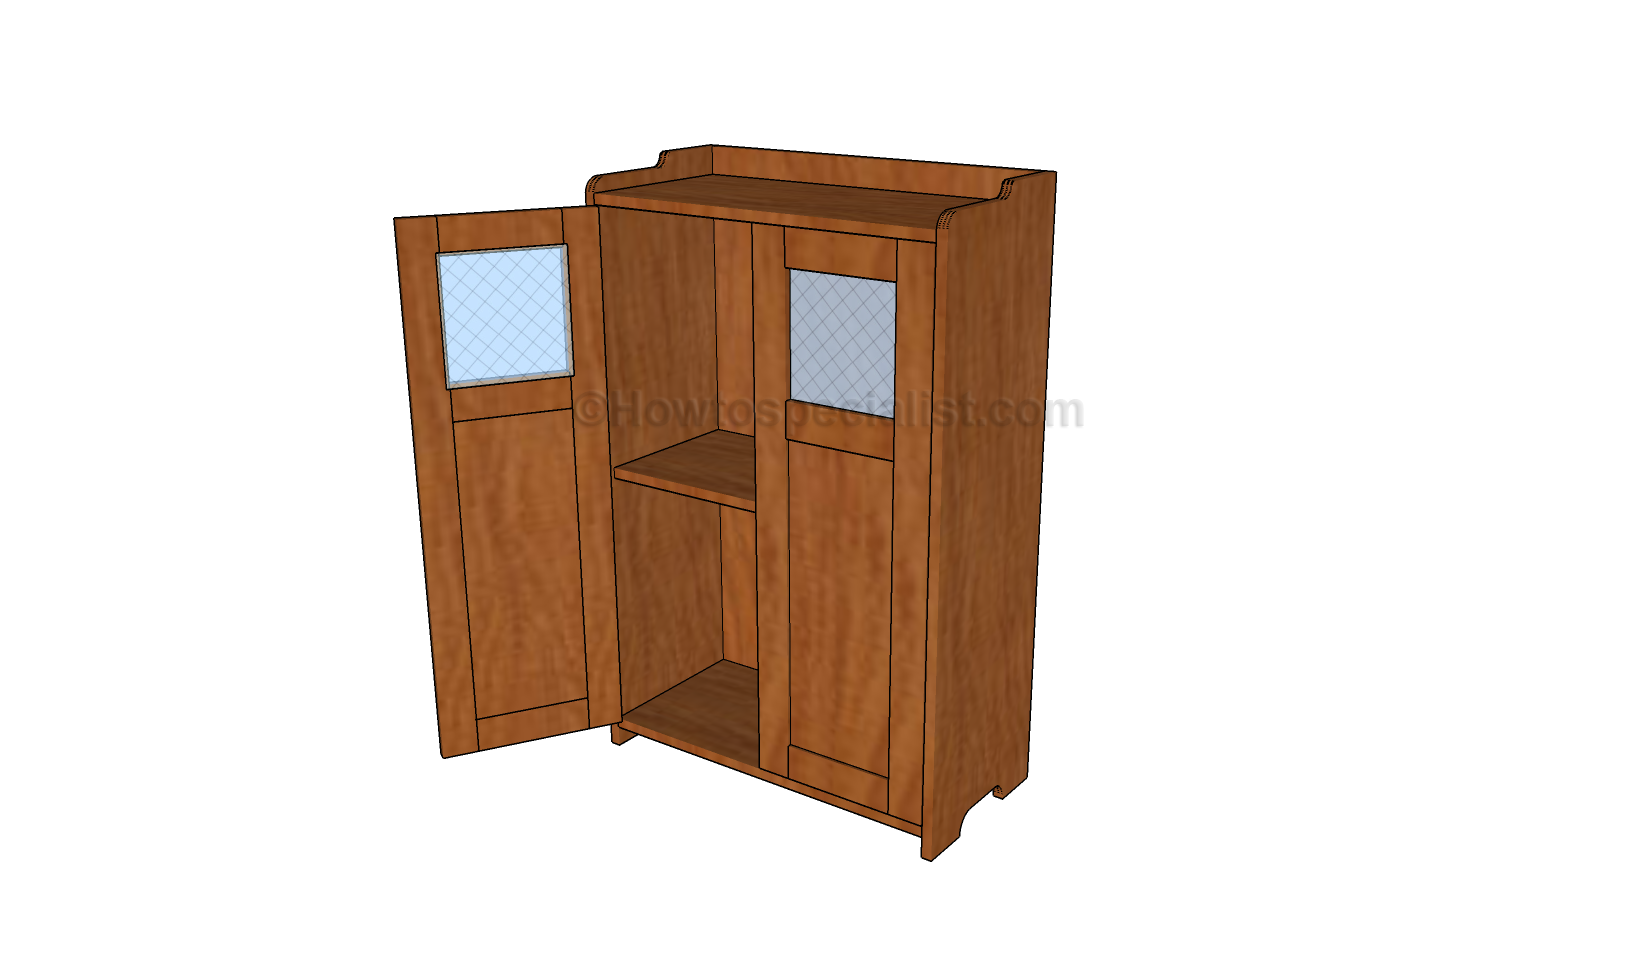 Cabinet Woodworking Plans Diy. Second-sun.co